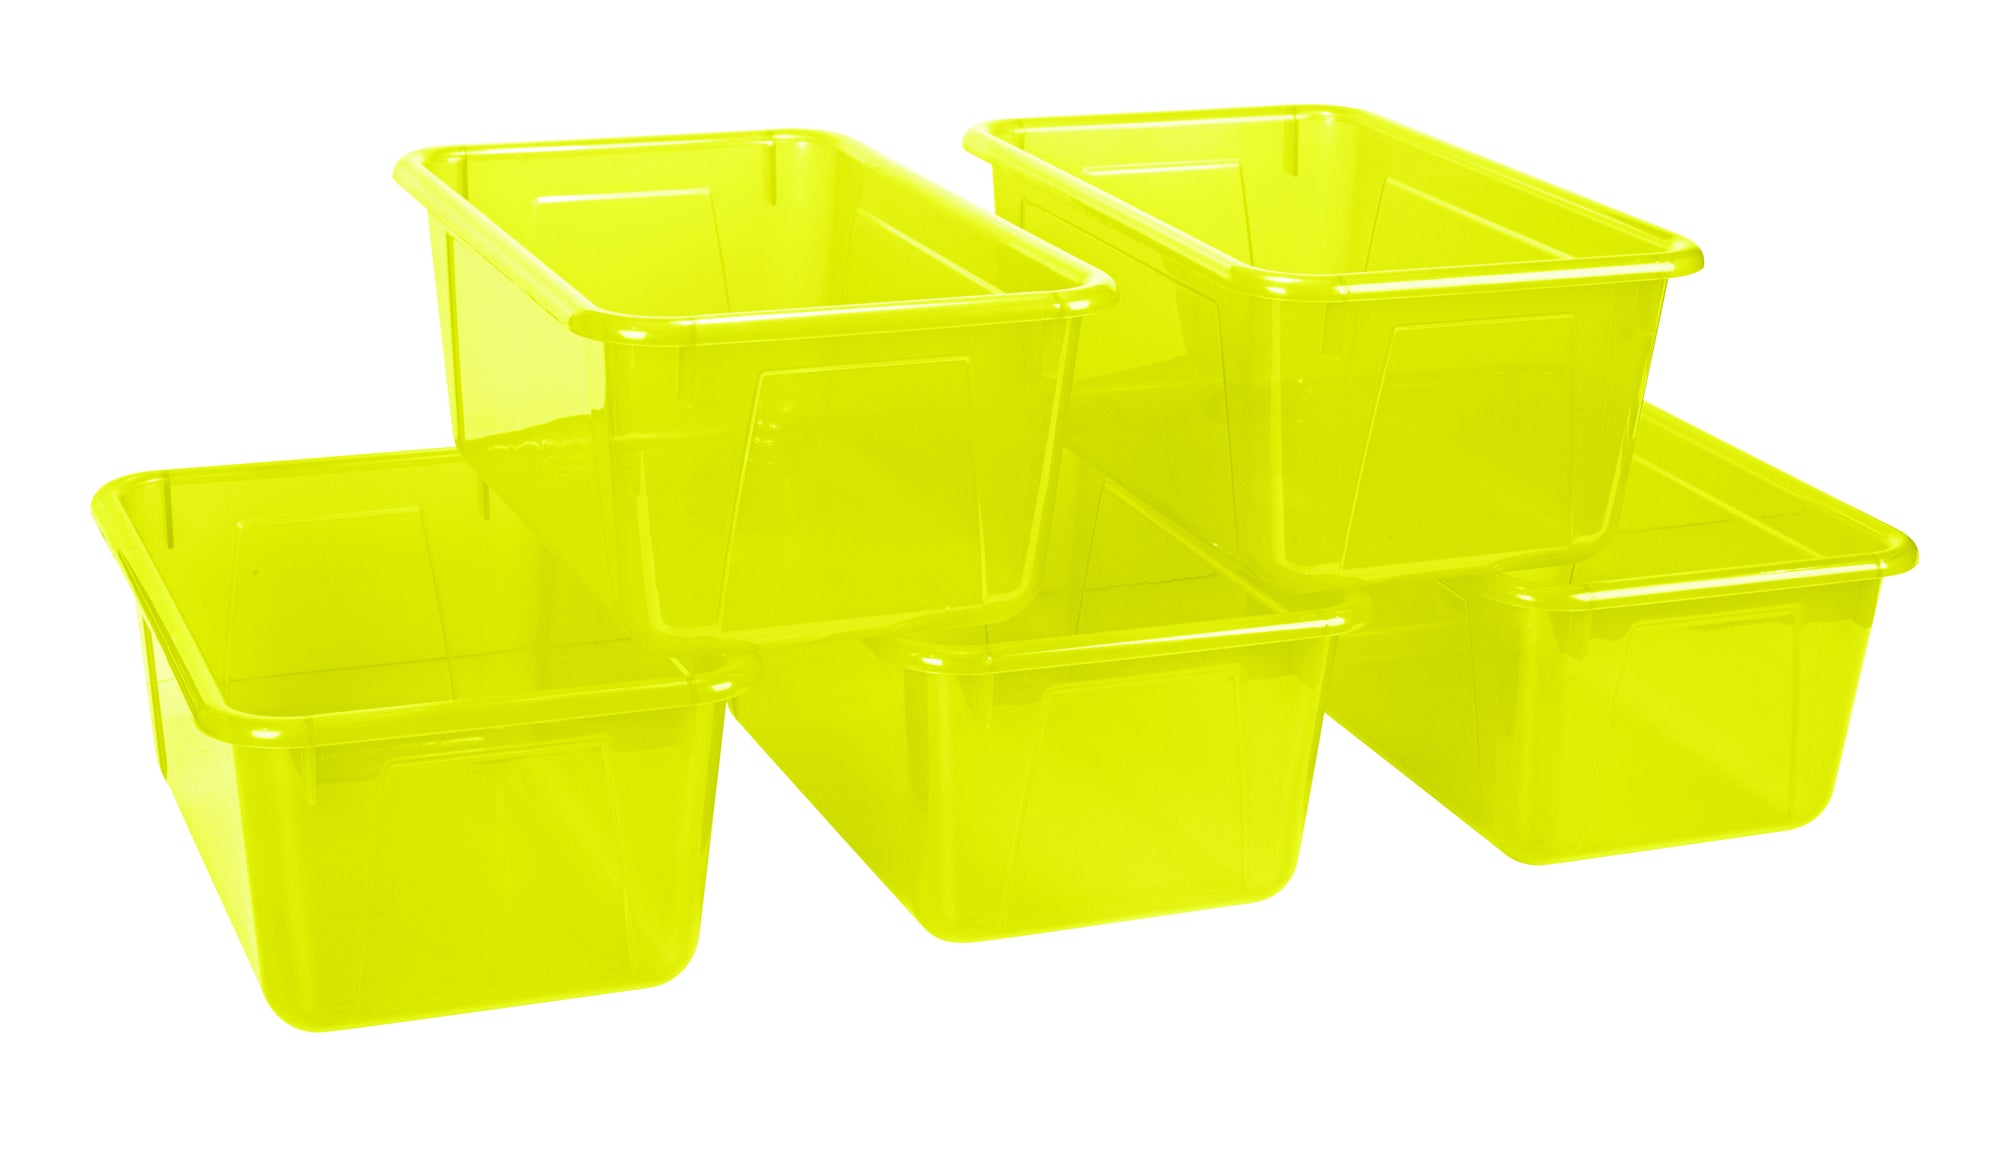 Storex Small Cubby Bin, Candy Yellow, 5-Pack